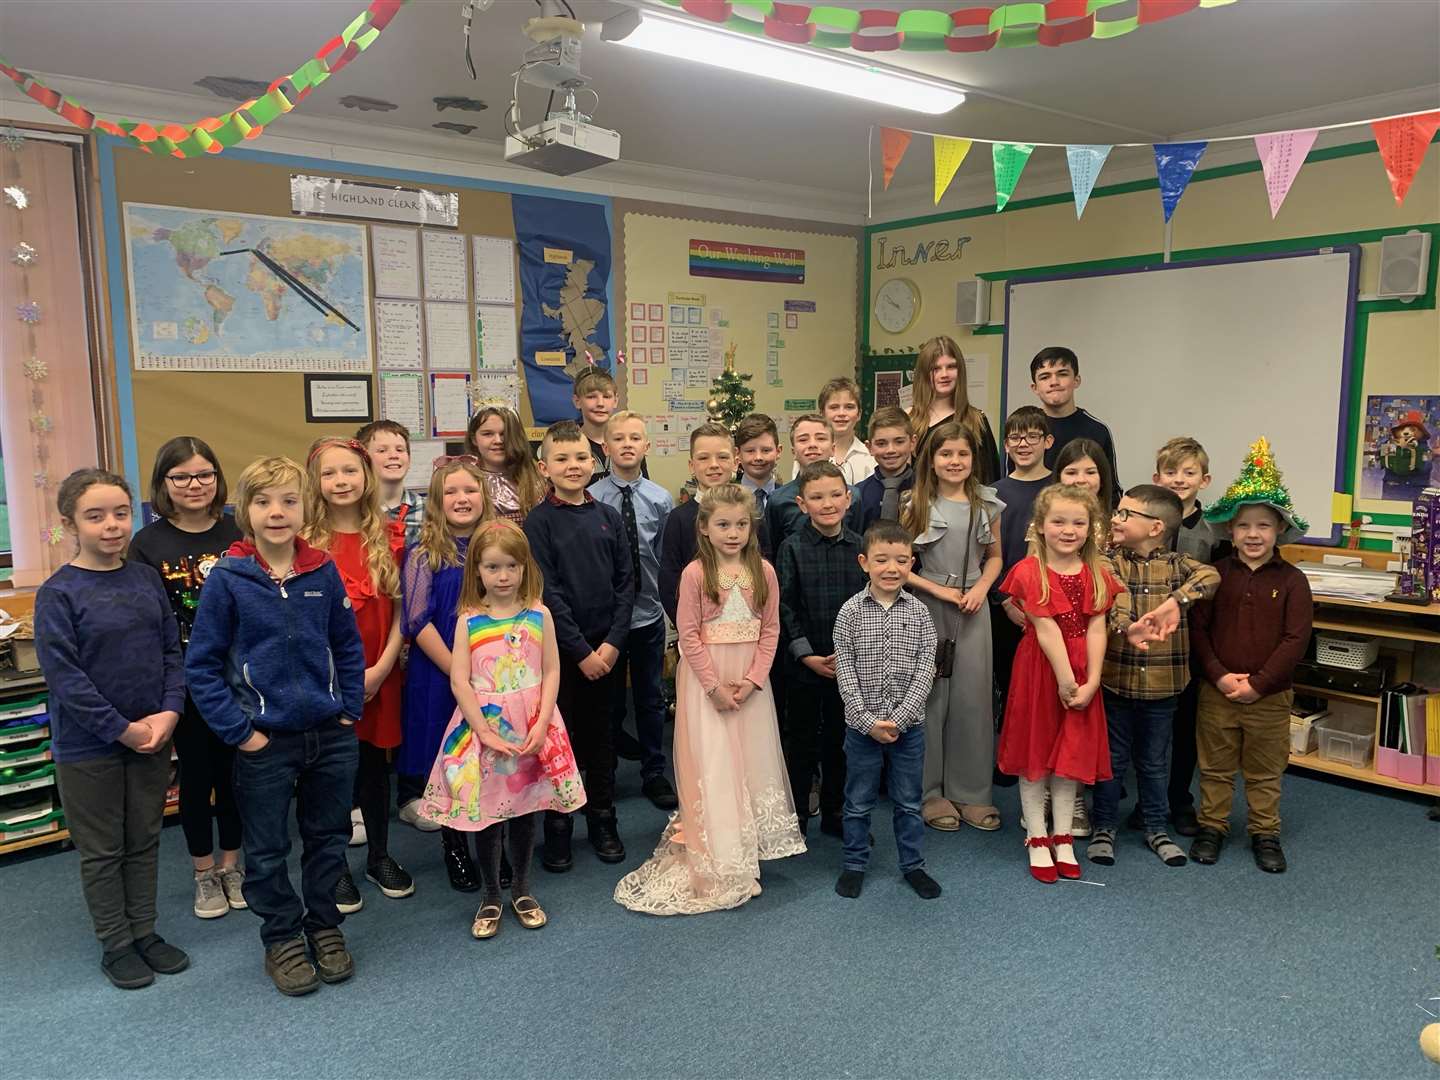 Children from Inver Primary School singing carols. Their performance was videoed and shared on the Inver community Facebook page for all the parents and friends to see.